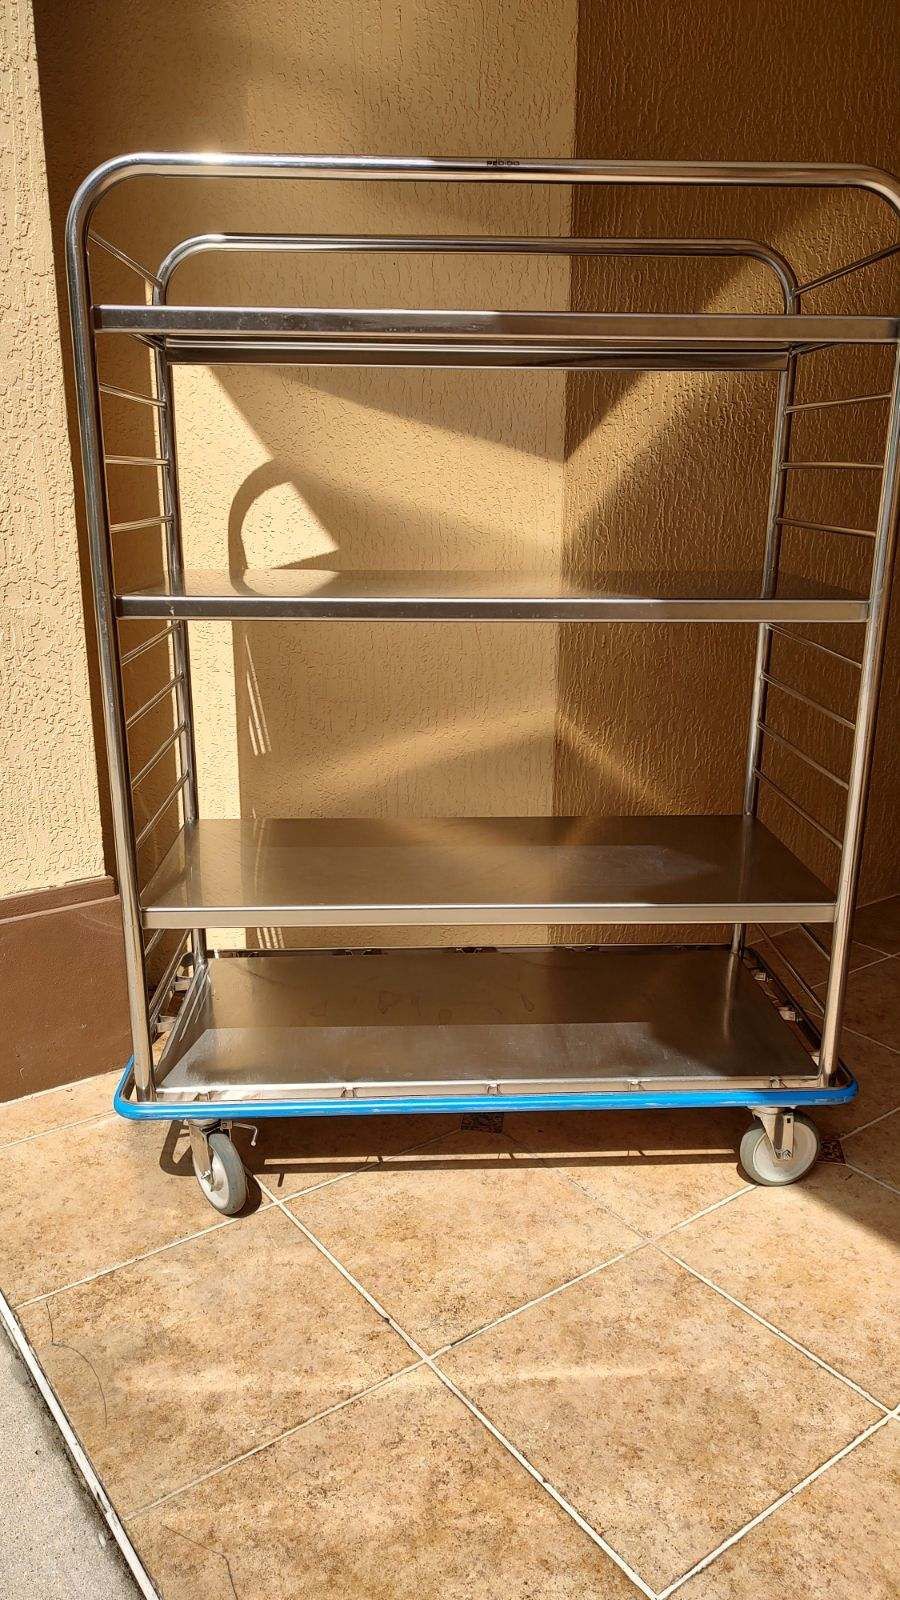 Large stainless steel cart